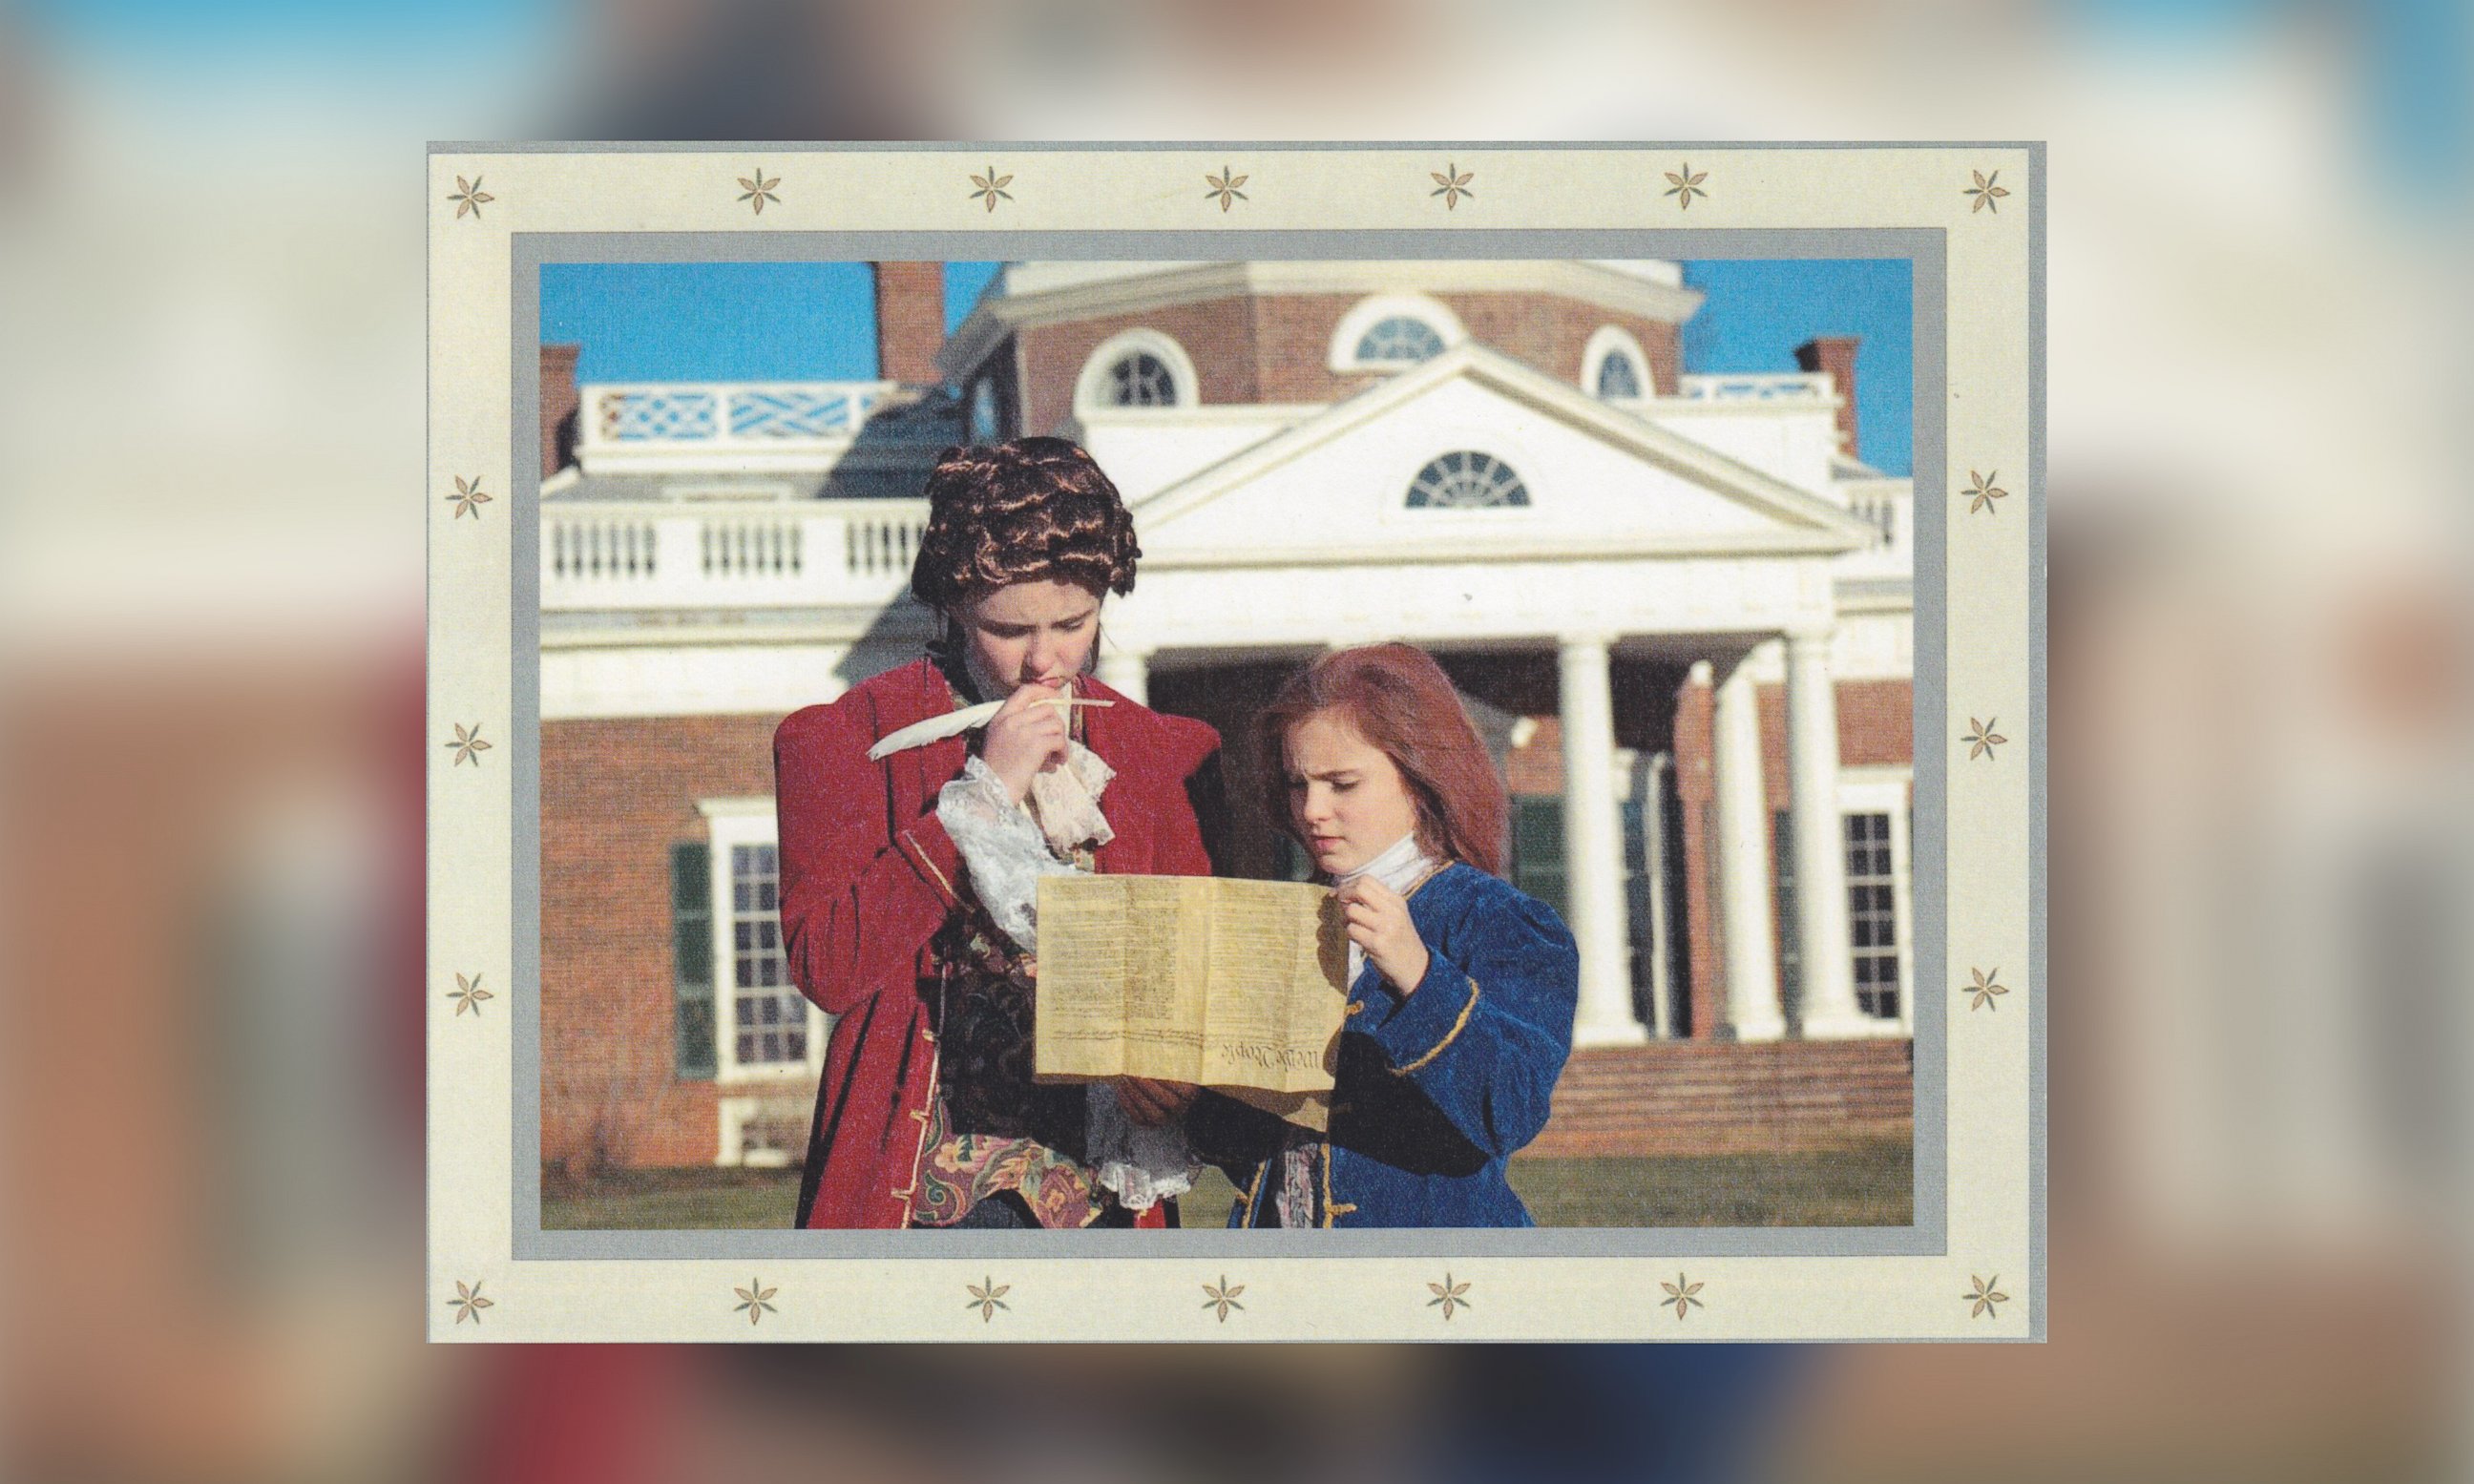 PHOTO: The Jensen family traveled to Thomas Jefferson's famous home Monticello to photograph their 2012 President's Day card. Matilda and Franny dressed as presidents Thomas Jefferson and James Madison. 